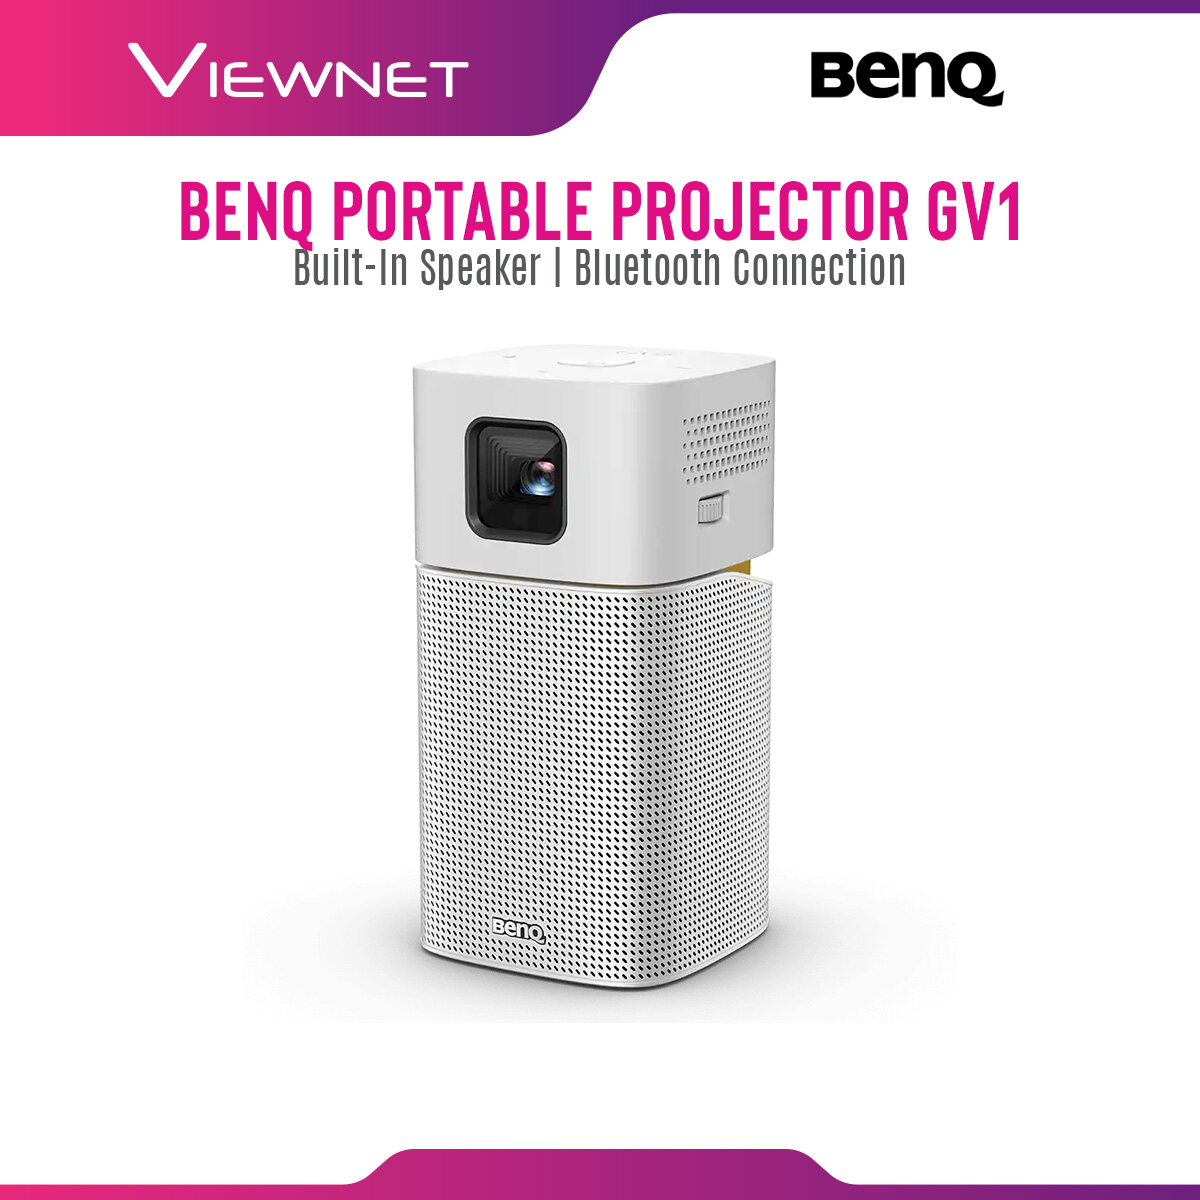 BenQ GV1 Portable LED Projector with 200 Lumens, Built-in Speaker, Bluetooth and WiFi Connection Support